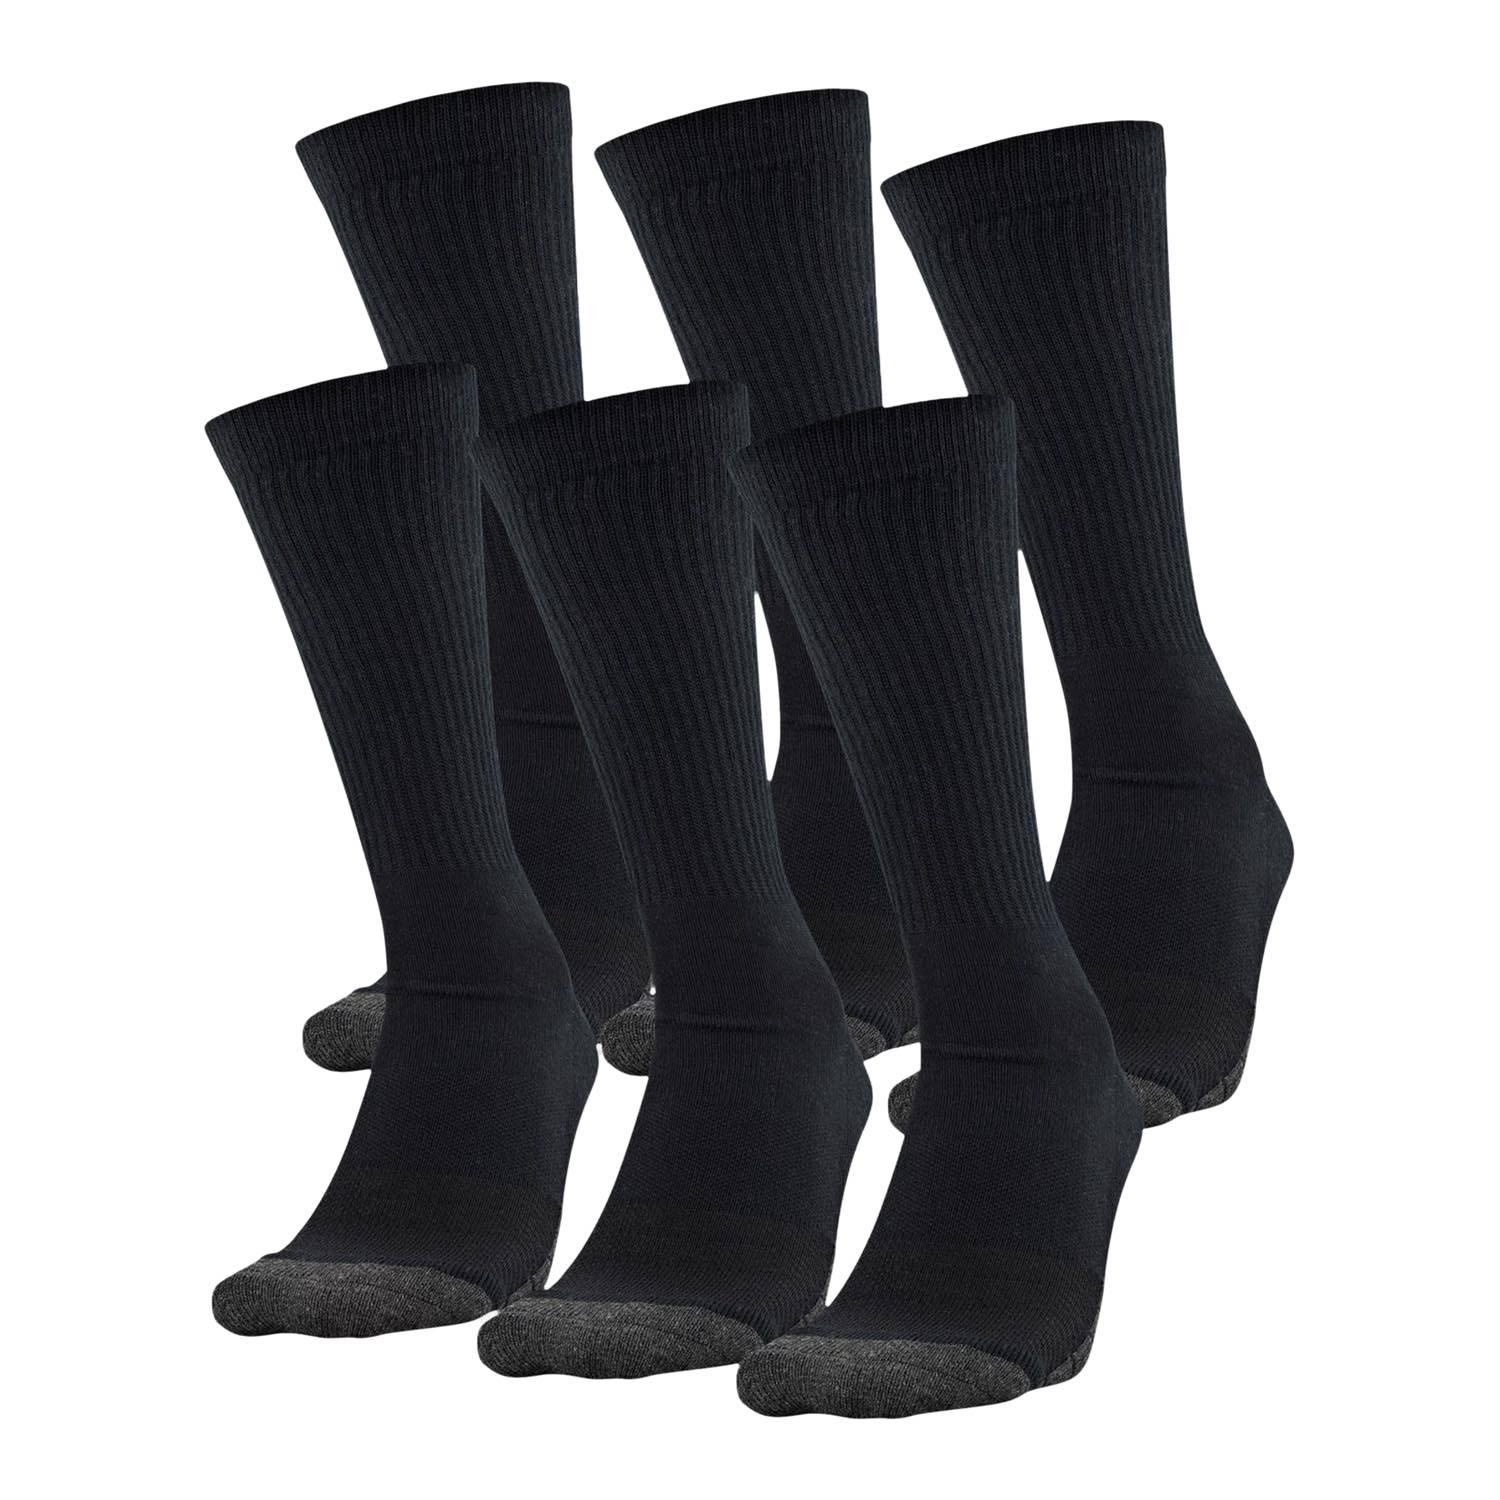 Under Armour Performance Tech Crew Socks (6 pack) in Black